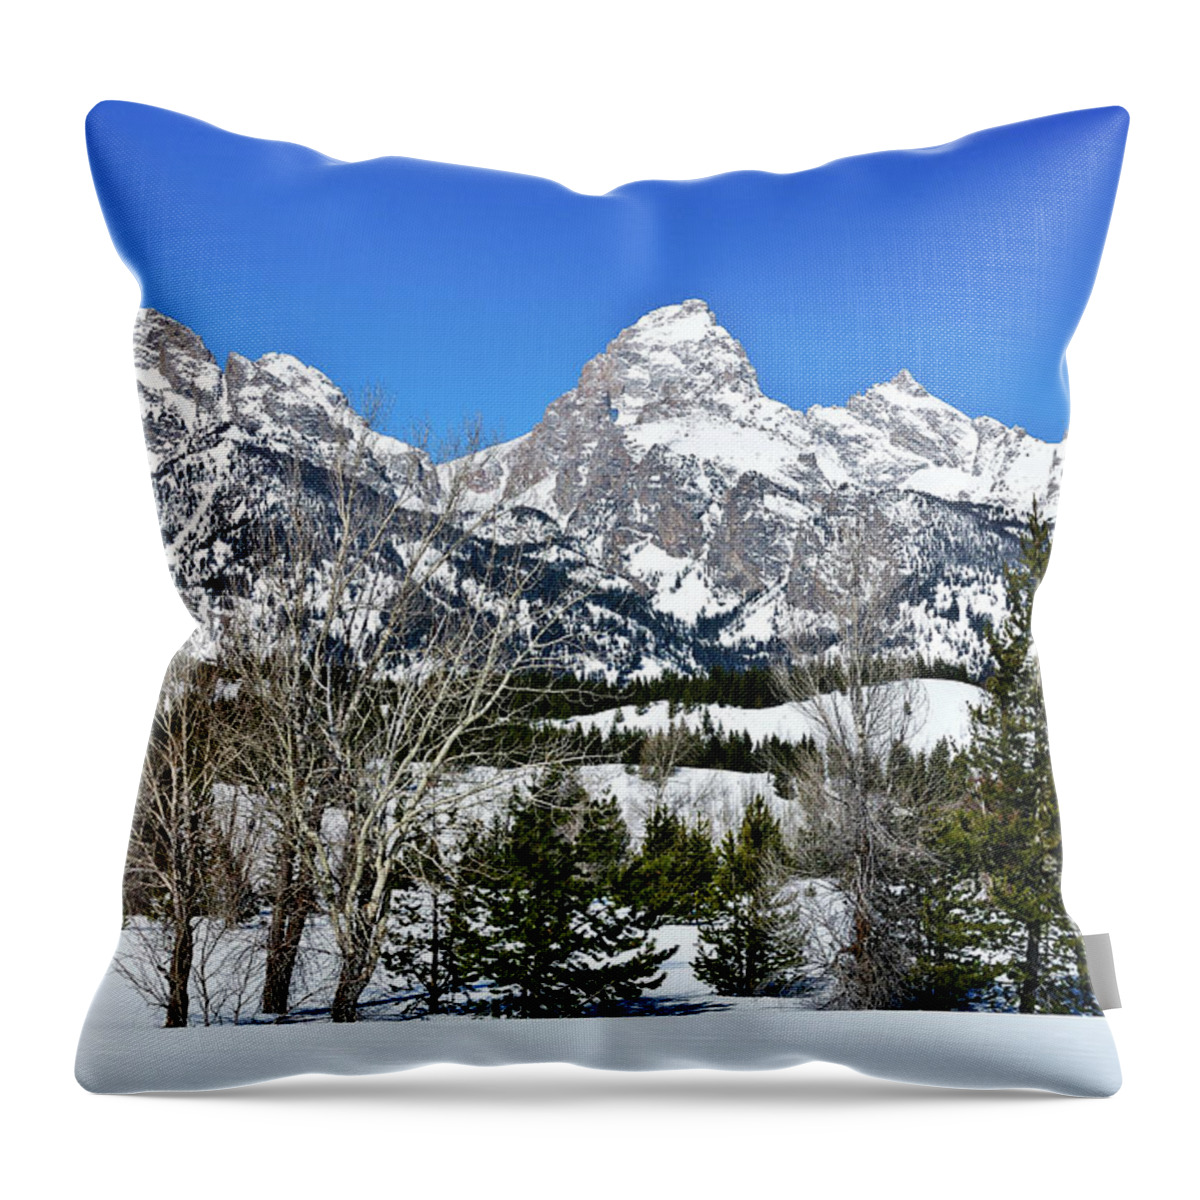 Grand Teton National Park Throw Pillow featuring the photograph Teton Winter Landscape by Greg Norrell